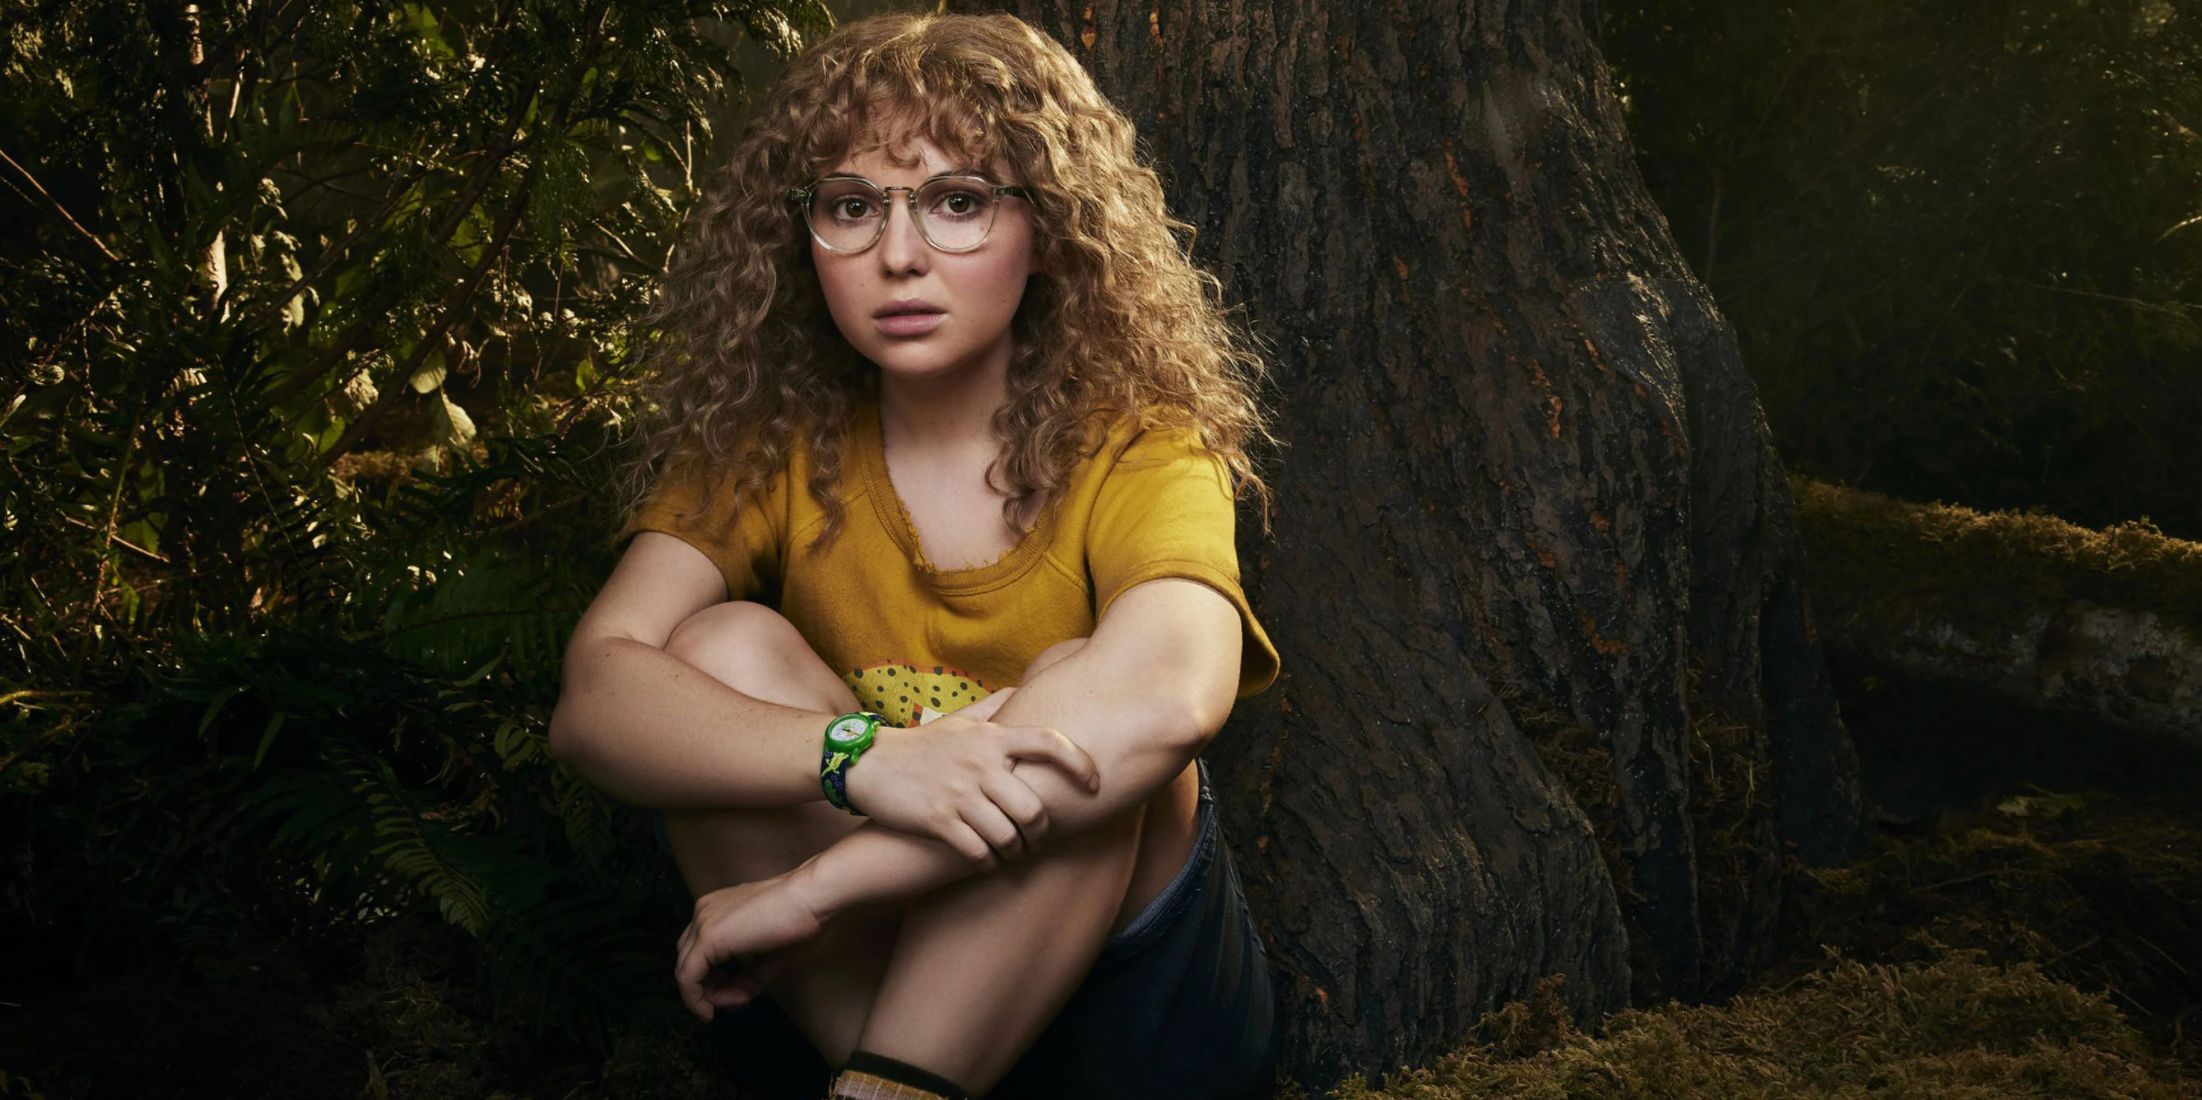 Misty sits in the woods in a promotional image for Yellowjackets